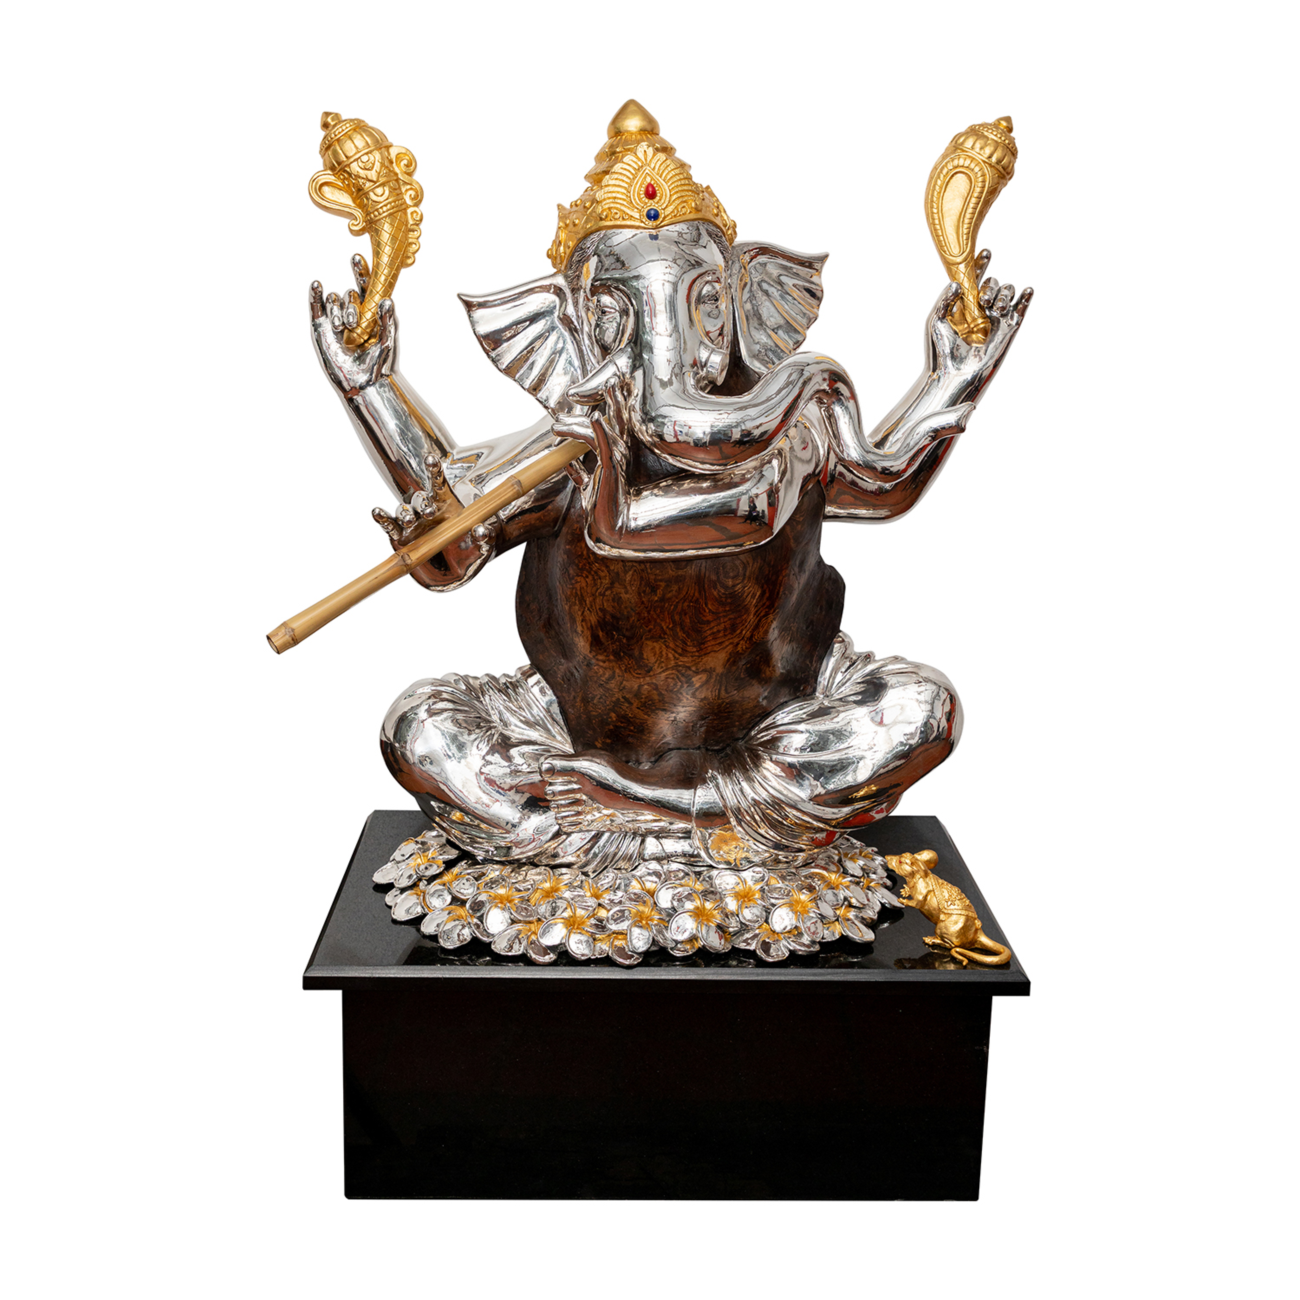 Festive Lord Ganesha Sculpture in Japanese Burl Wood and Silver